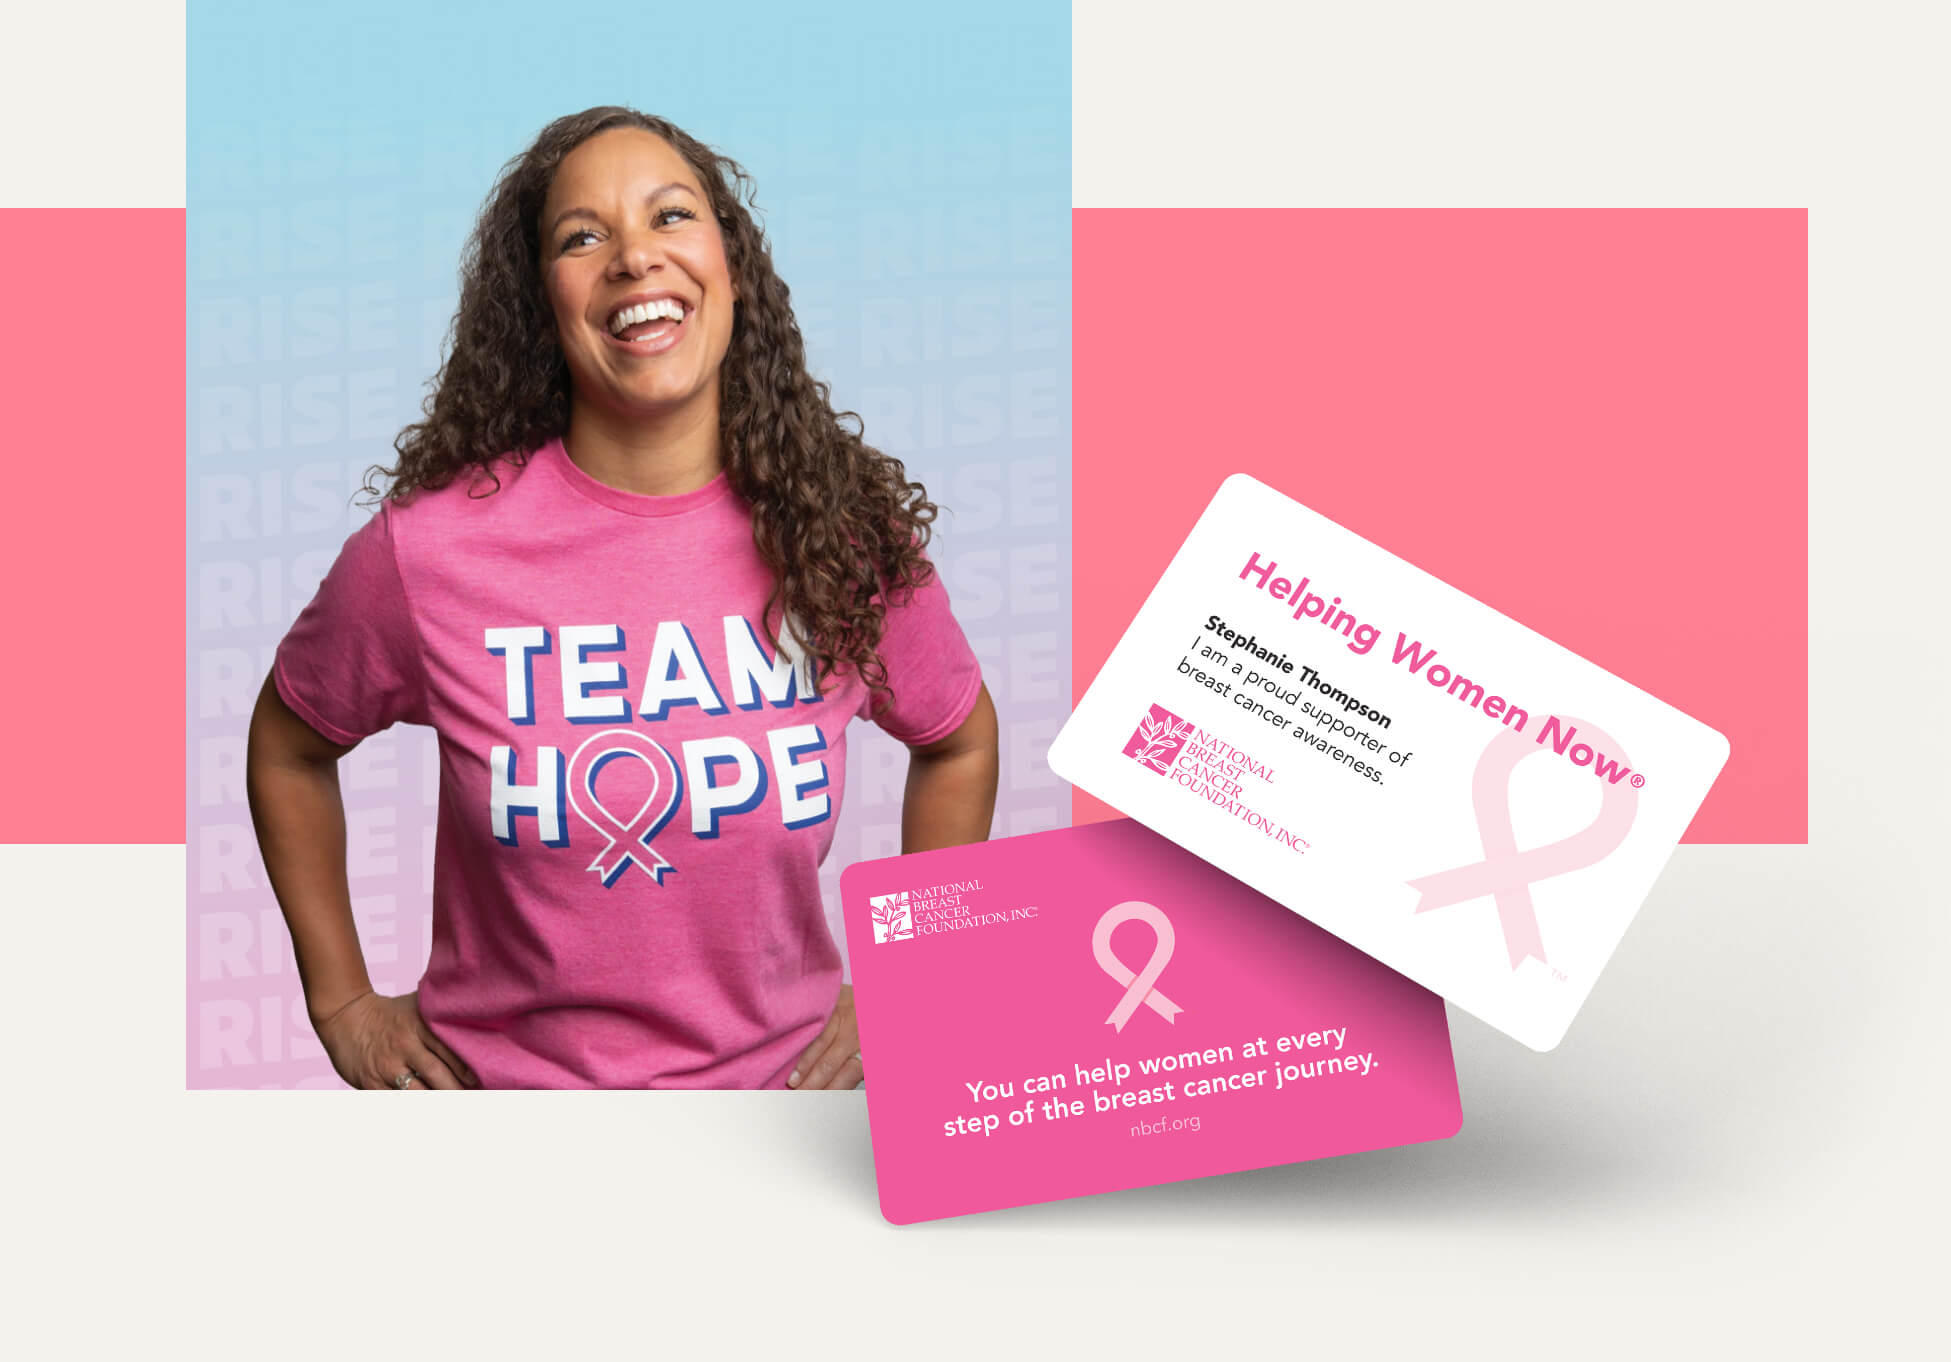 national breast cancer foundation team hope and business cards